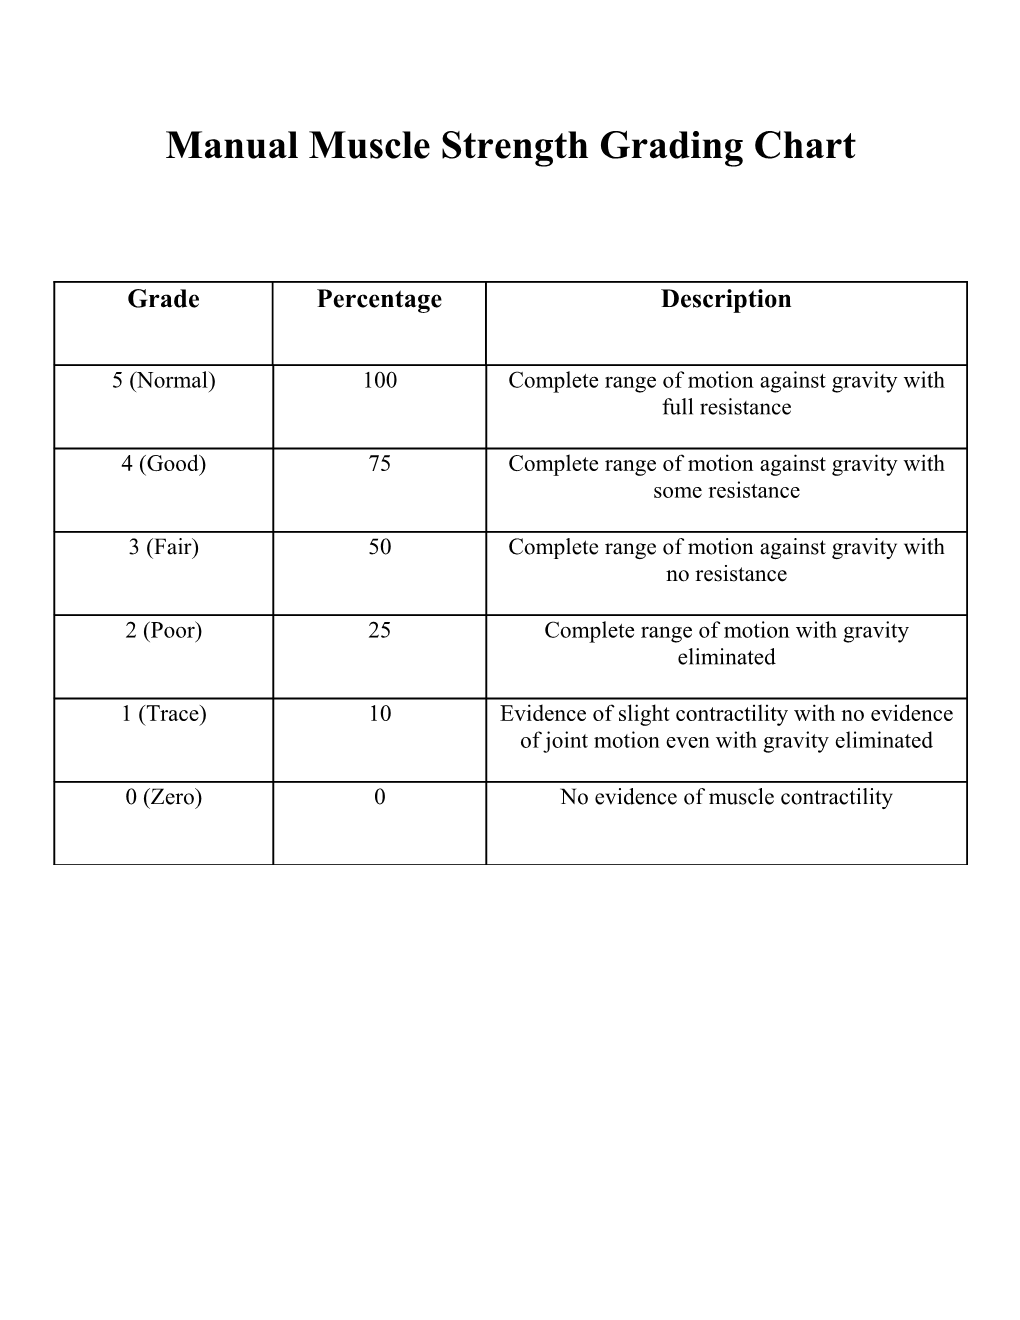 Manual Muscle Strength Grading Chart